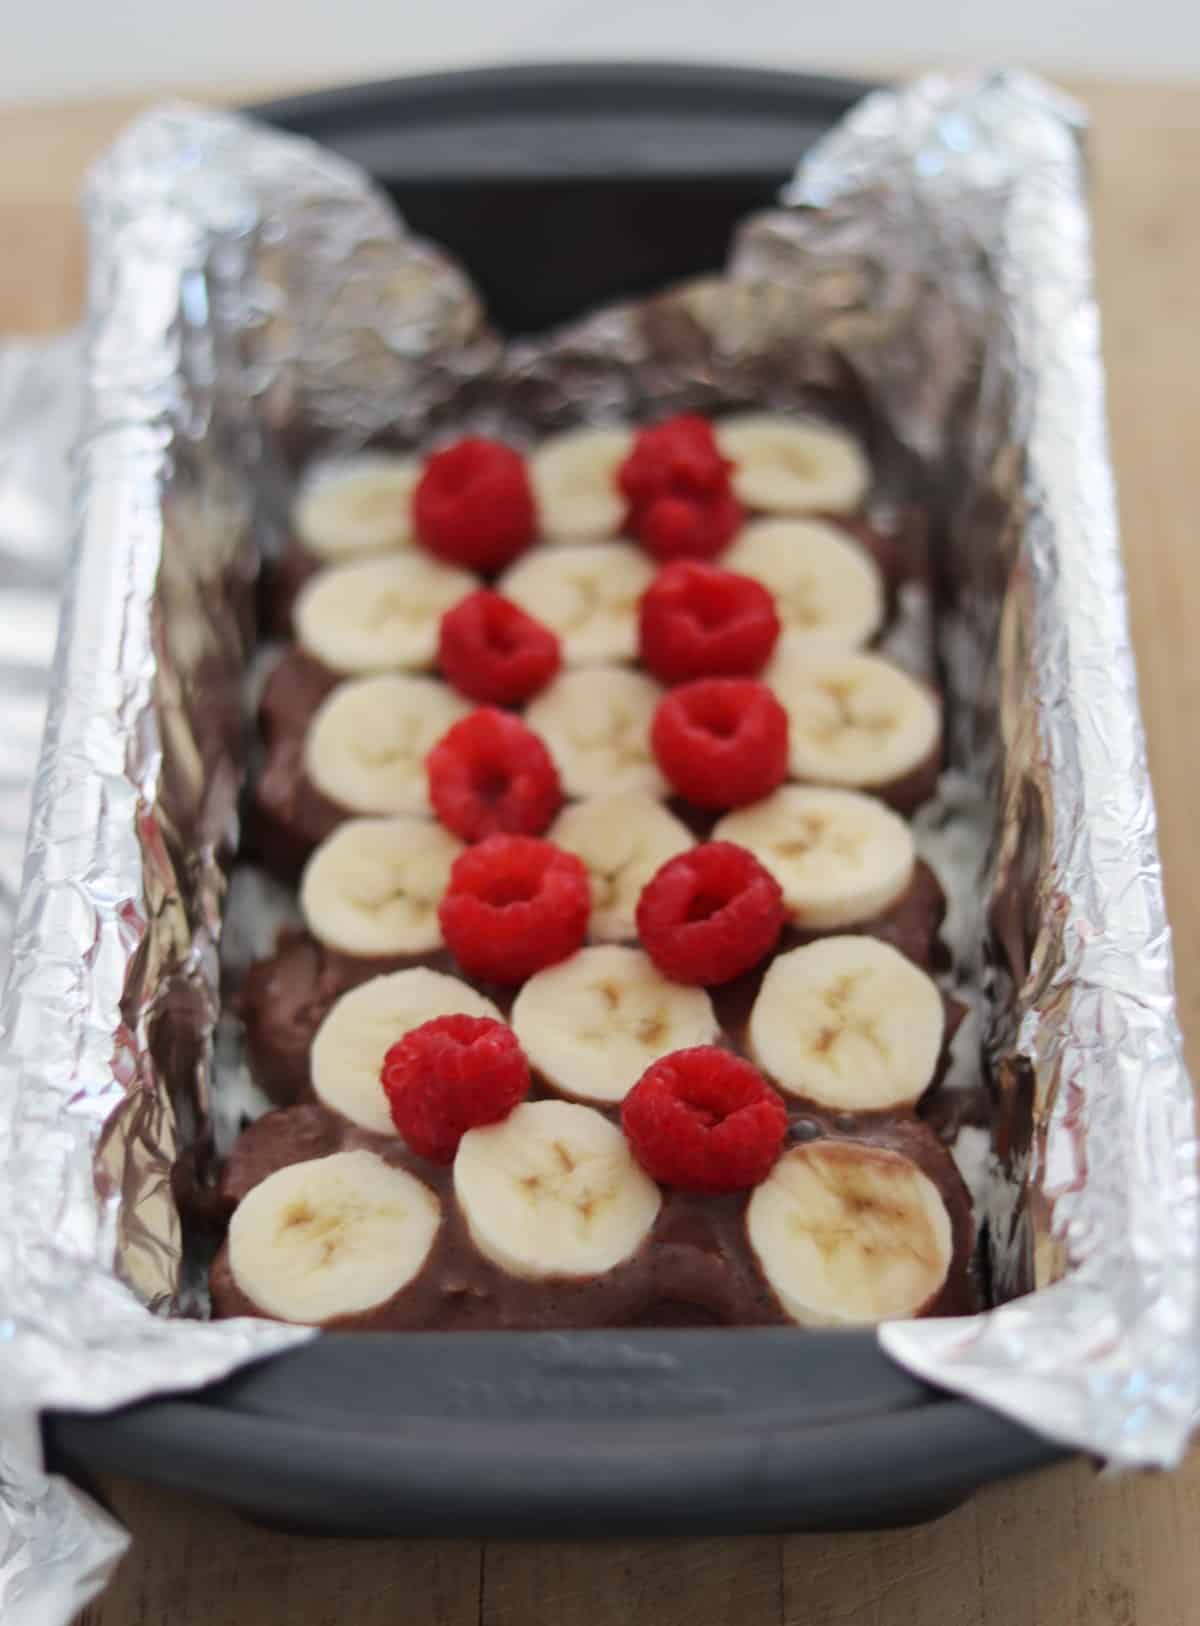 Chocolate fudge ice cream bars with sliced bananas and fresh raspberries in foil-lined loaf pan.